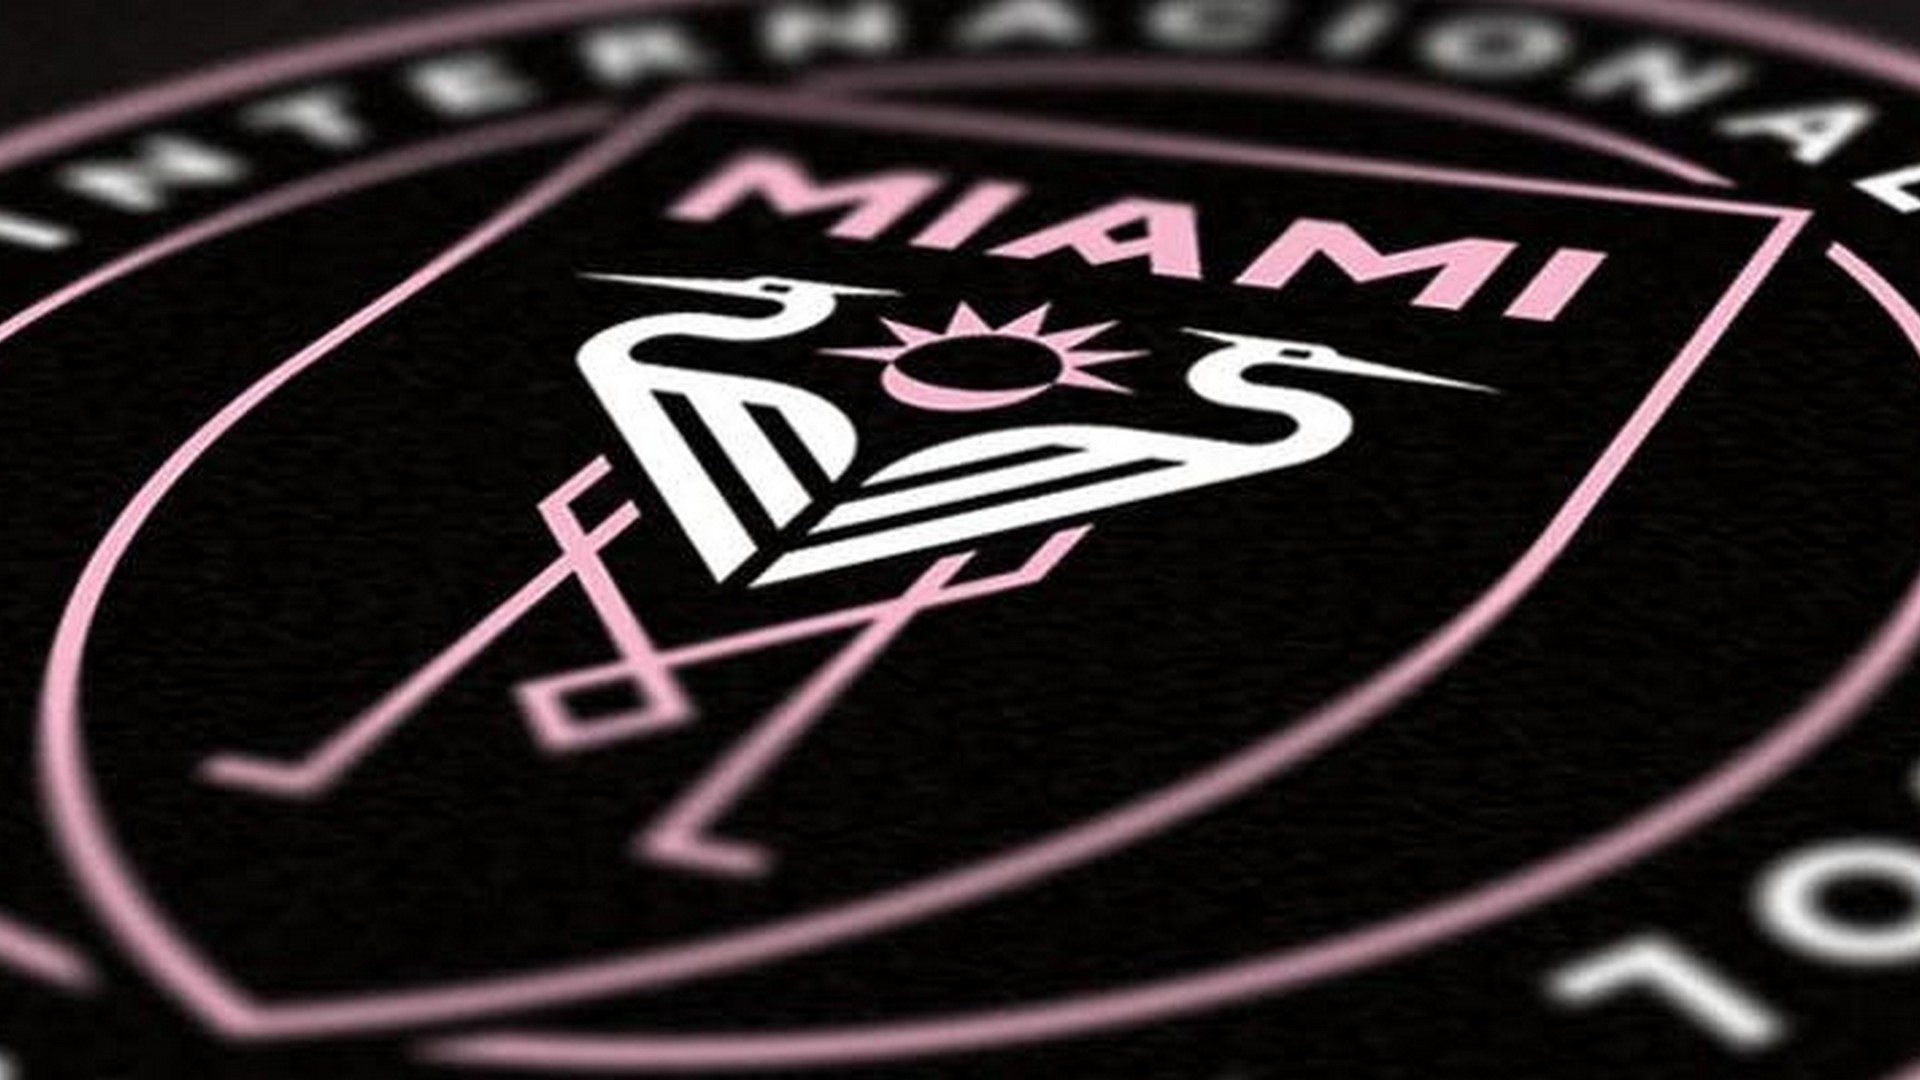 Inter Miami CF For Desktop Wallpaper with high-resolution 1920x1080 pixel. You can use this wallpaper for your Desktop Computers, Mac Screensavers, Windows Backgrounds, iPhone Wallpapers, Tablet or Android Lock screen and another Mobile device